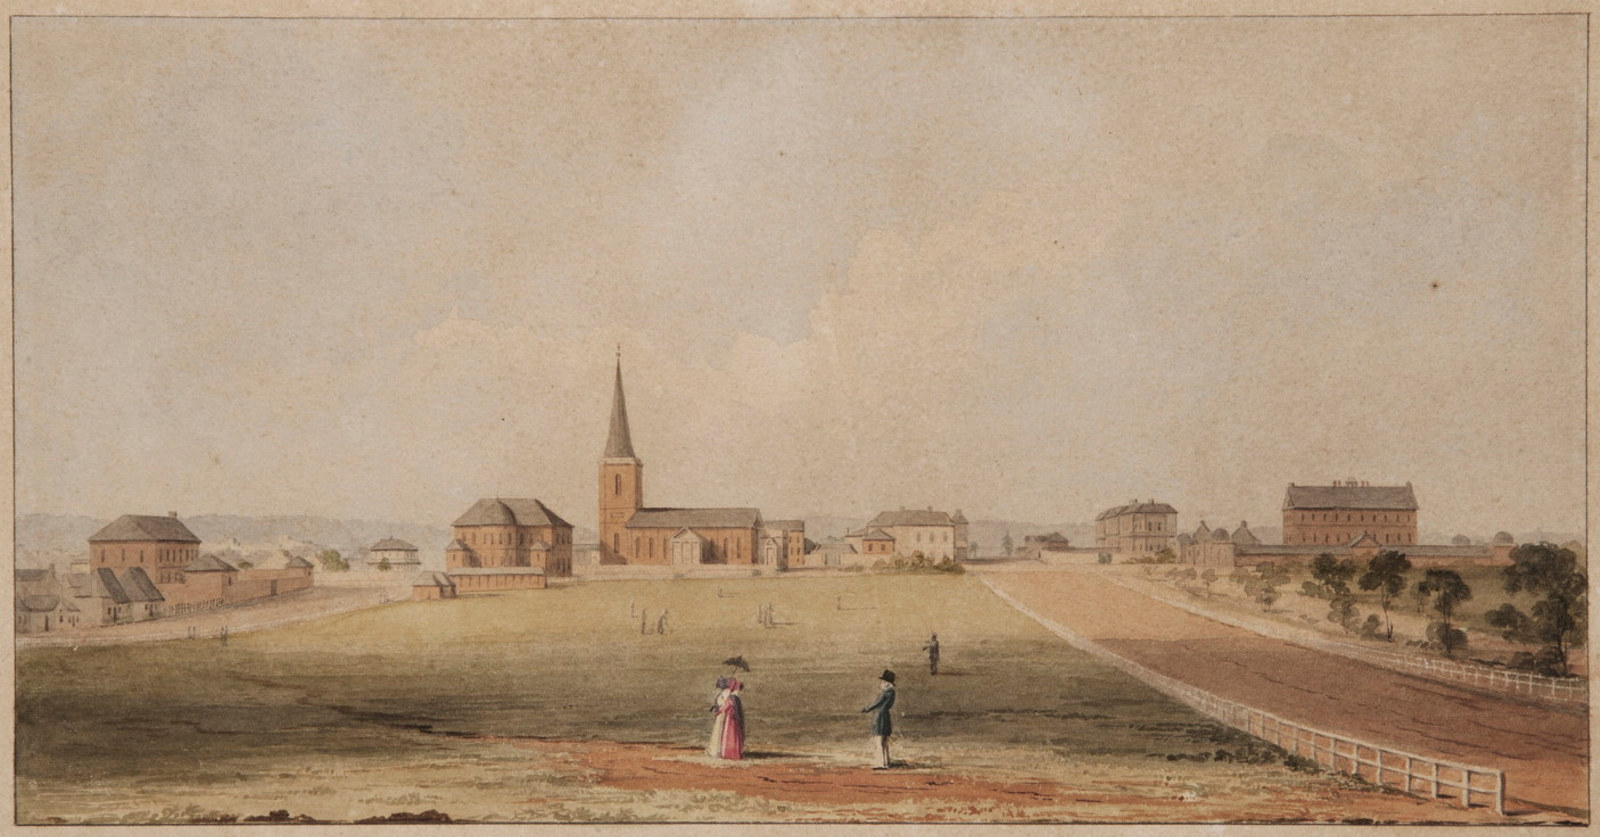 Watercolour painting of Hyde Park and surrounds, including Hyde Park Barracks, early 1840s